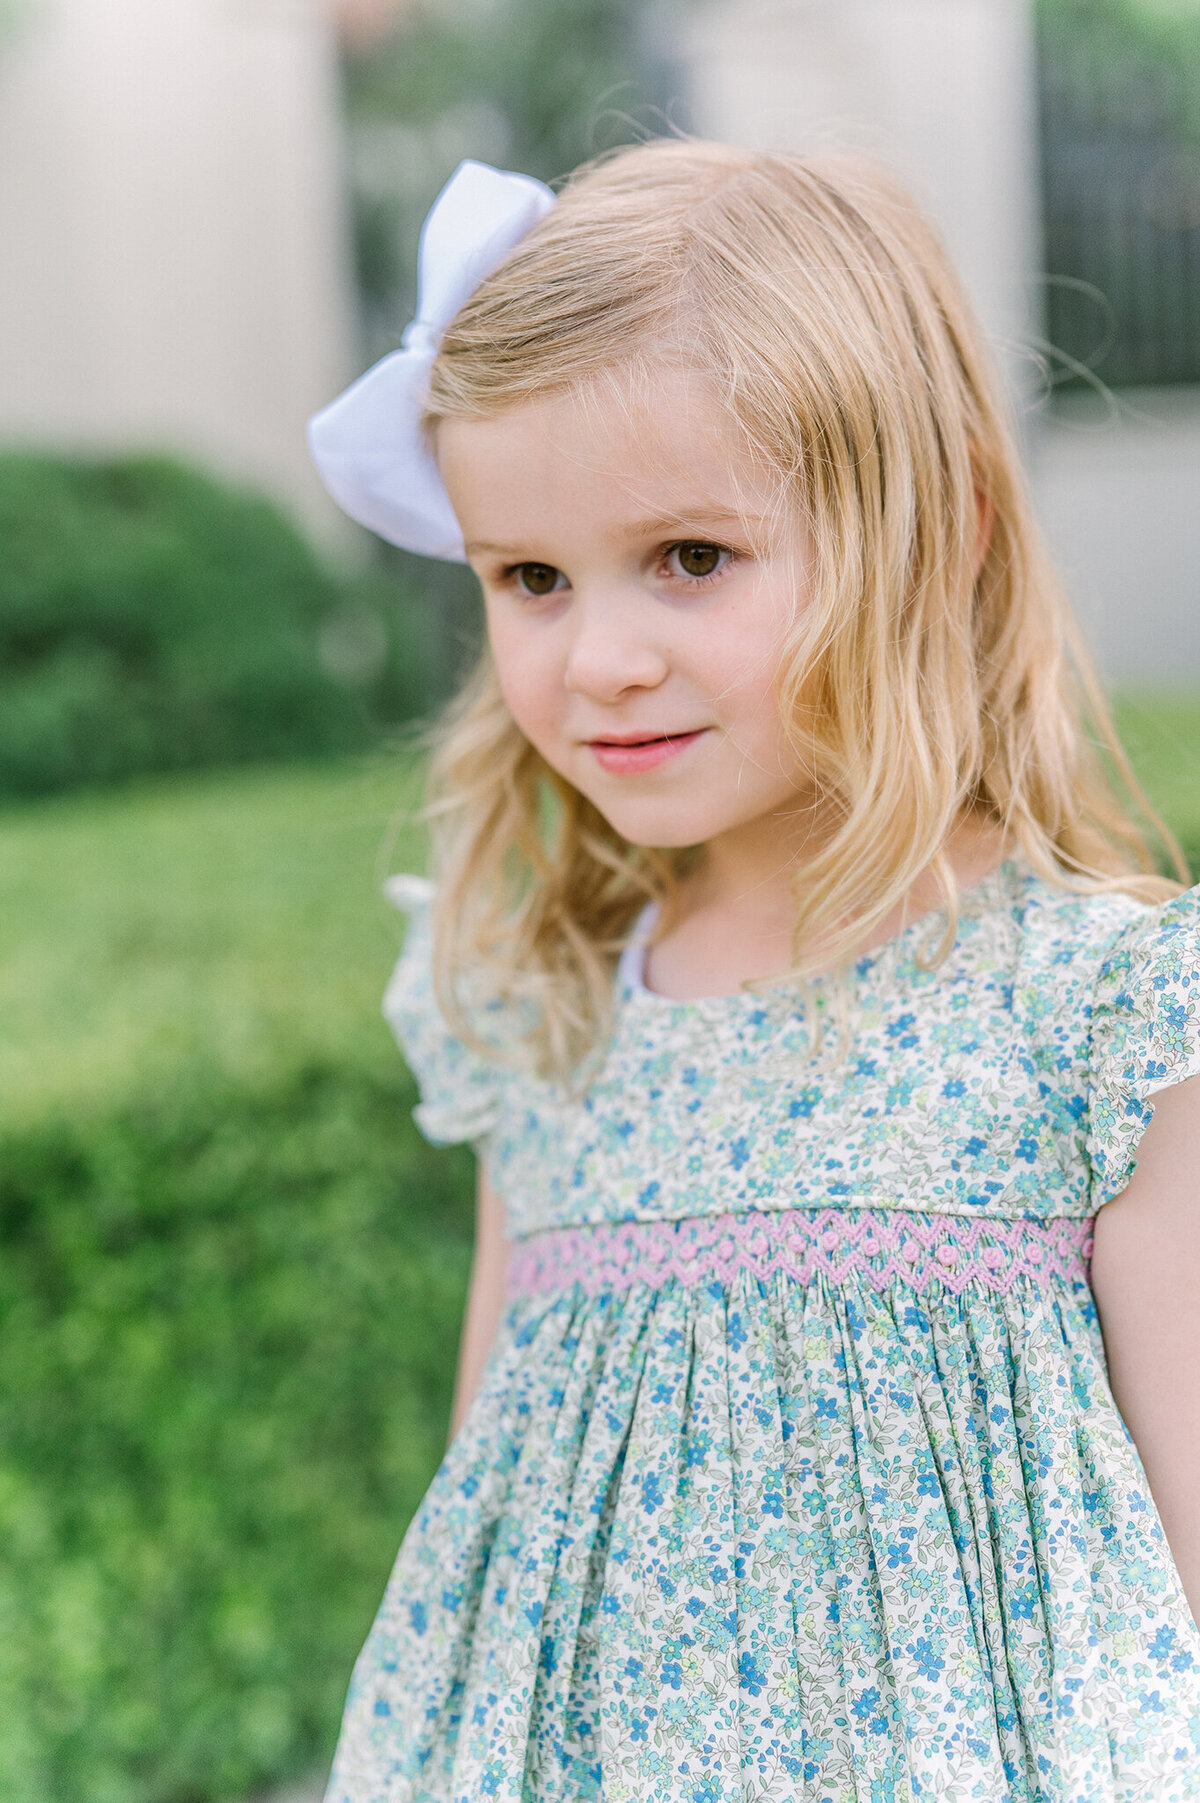 Young girl wearing a floral smocked dress.